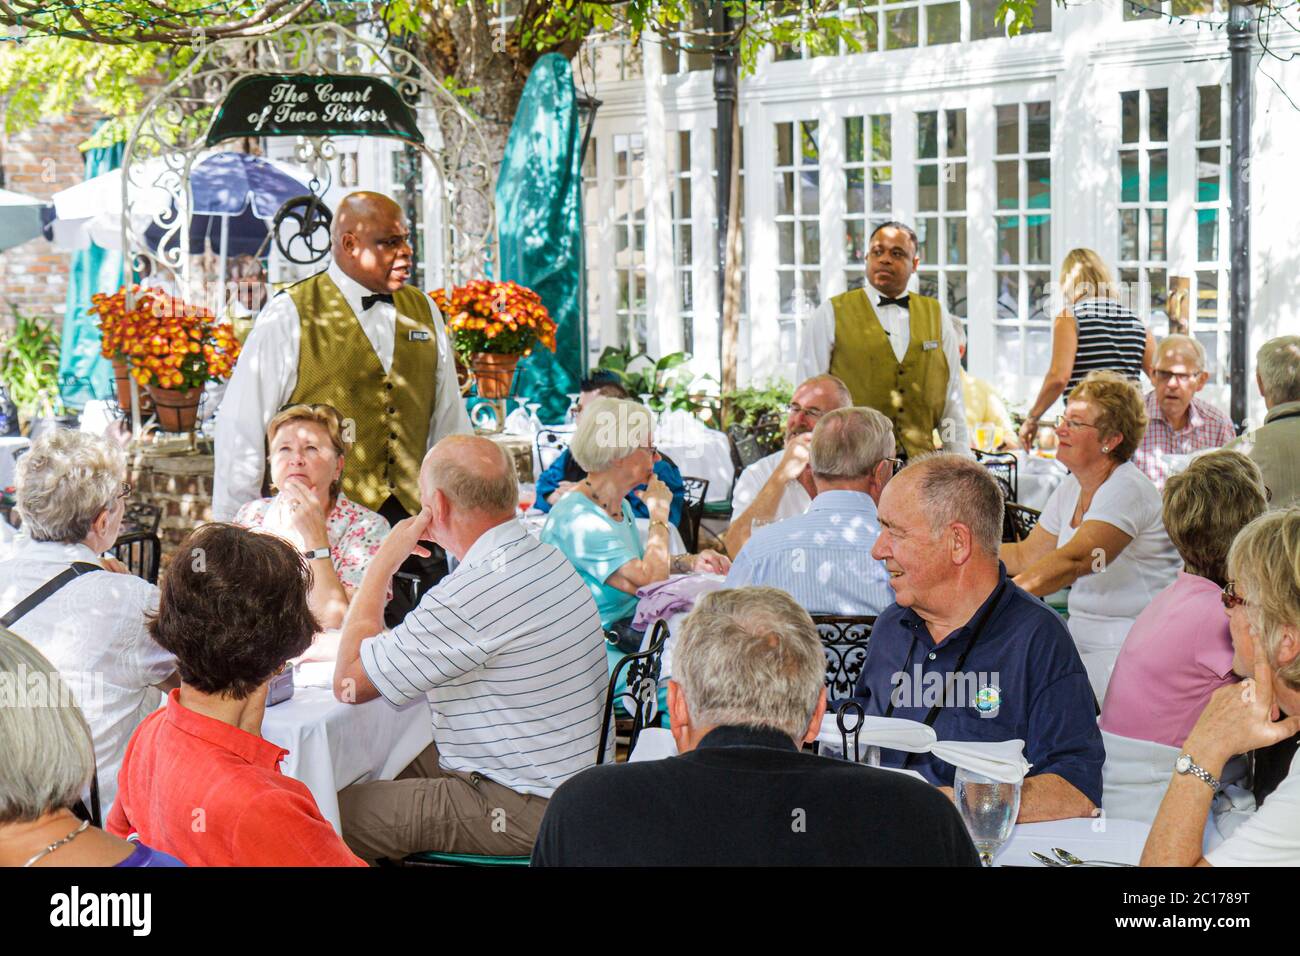 Louisiana New Orleans French Quarter,Royal Street,The Court of Two Sisters,Jazz Brunch buffet style,food,all you can eat,Creole cooking,historic resta Stock Photo